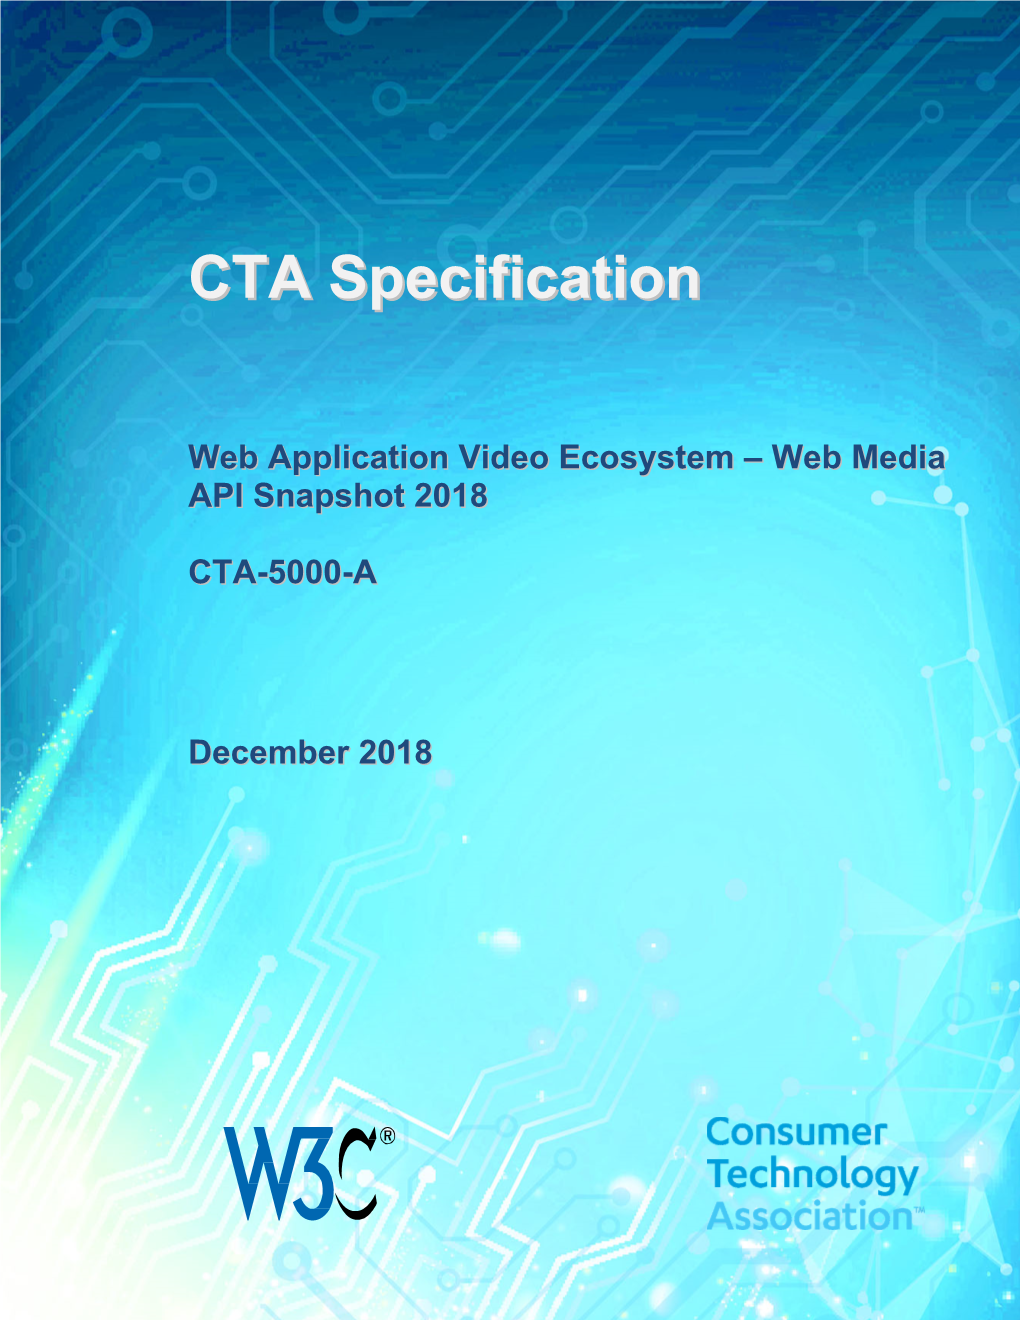 CTA Specification, CTA-5000-A) and W3C (As a Final Community Group Report), by Agreement Between the Two Organizations